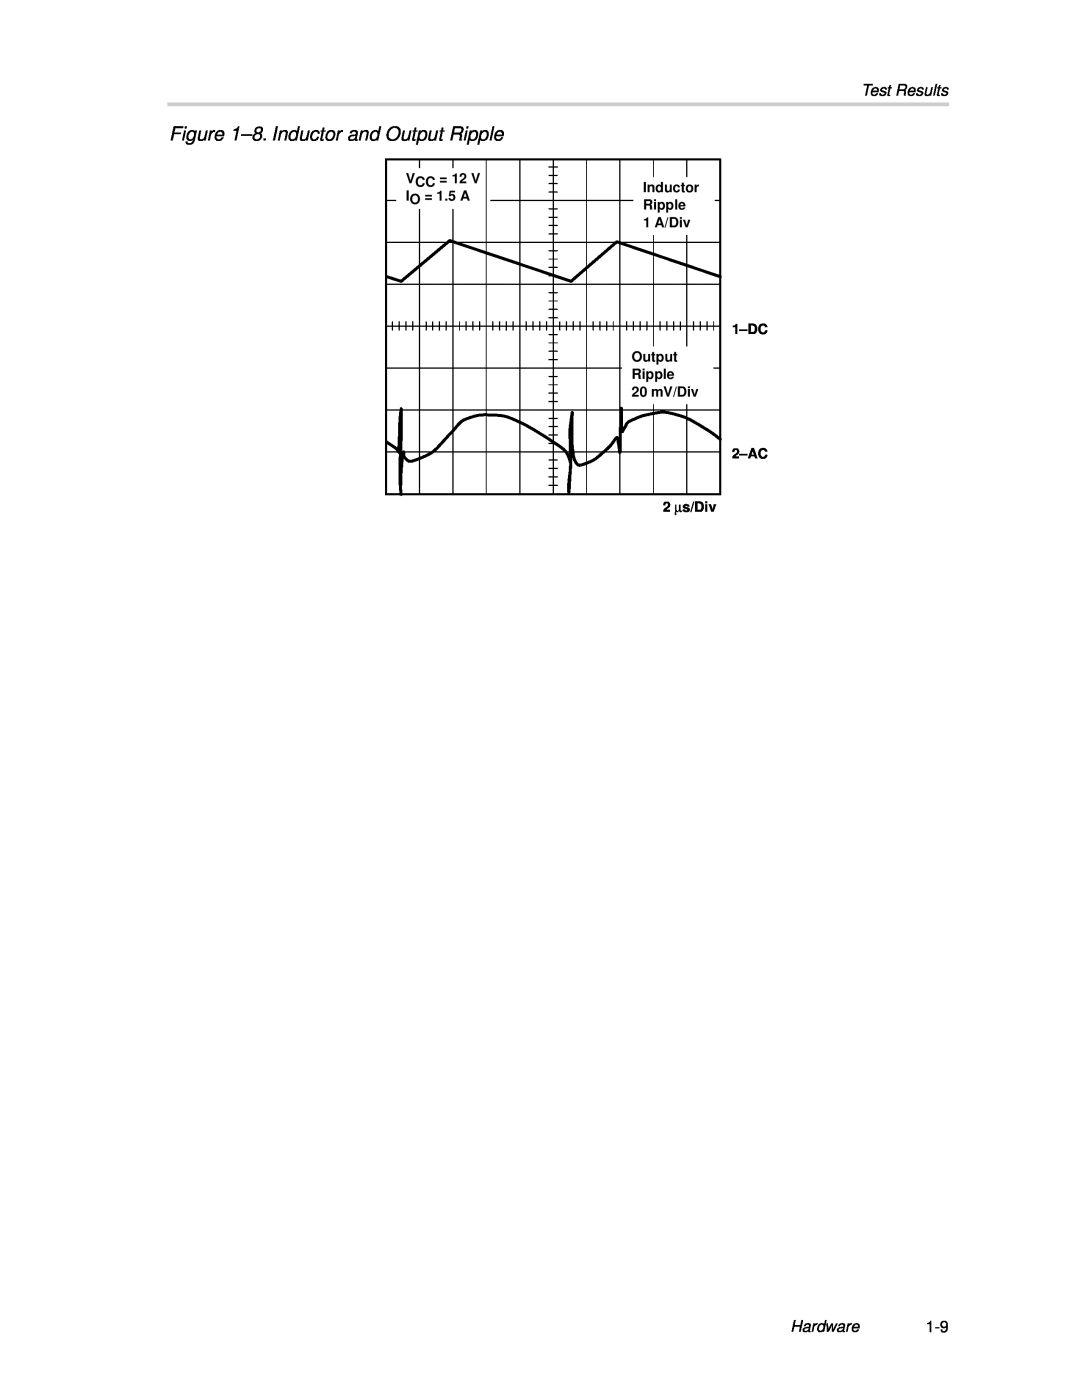 Texas Instruments SLVP089 manual 8. Inductor and Output Ripple, Test Results, Hardware1-9, 2-AC 